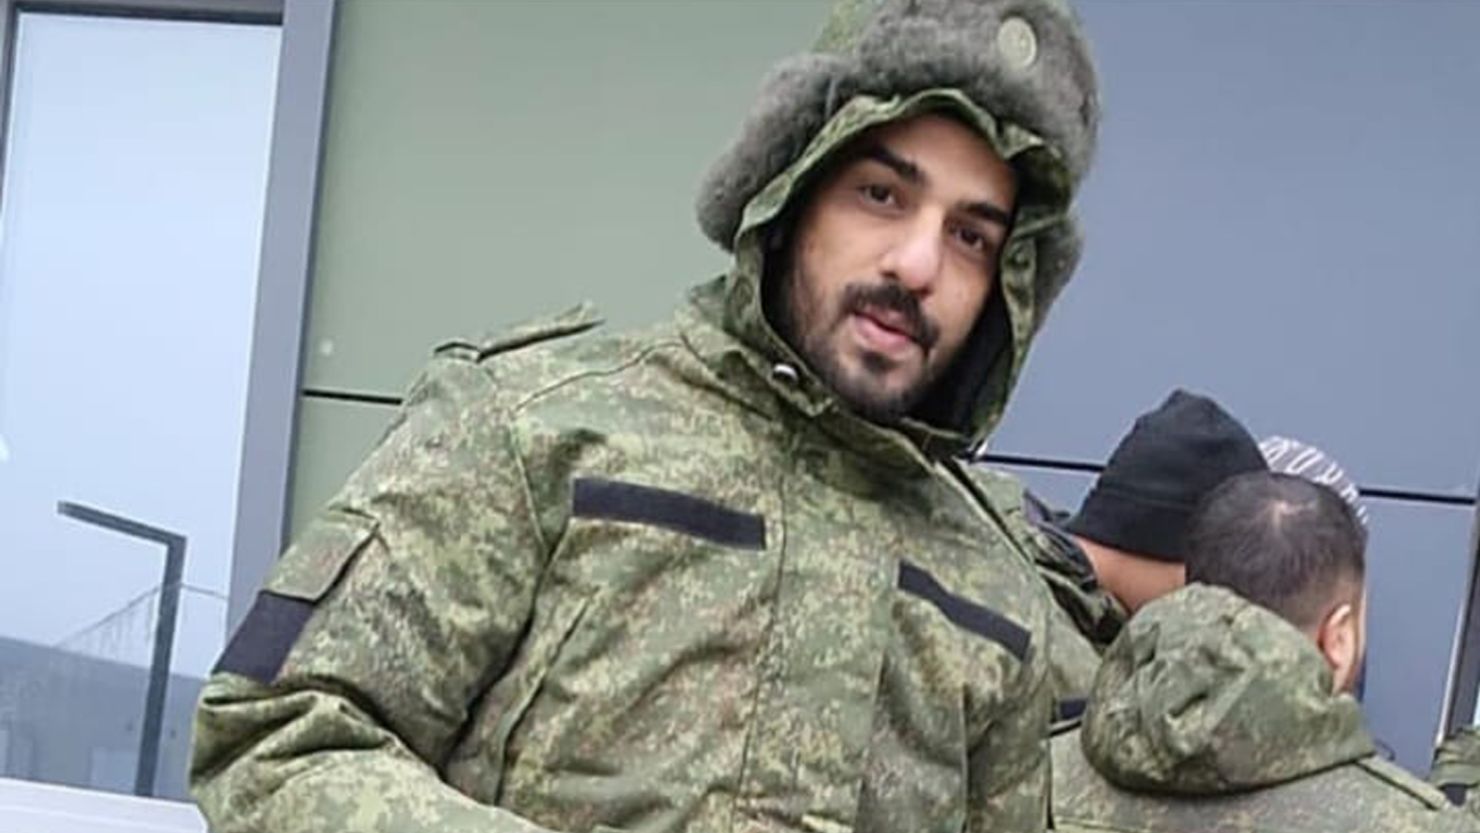 Asfan Mohammed, seen in a Russian military uniform, in an image provided by his brother, Imran.